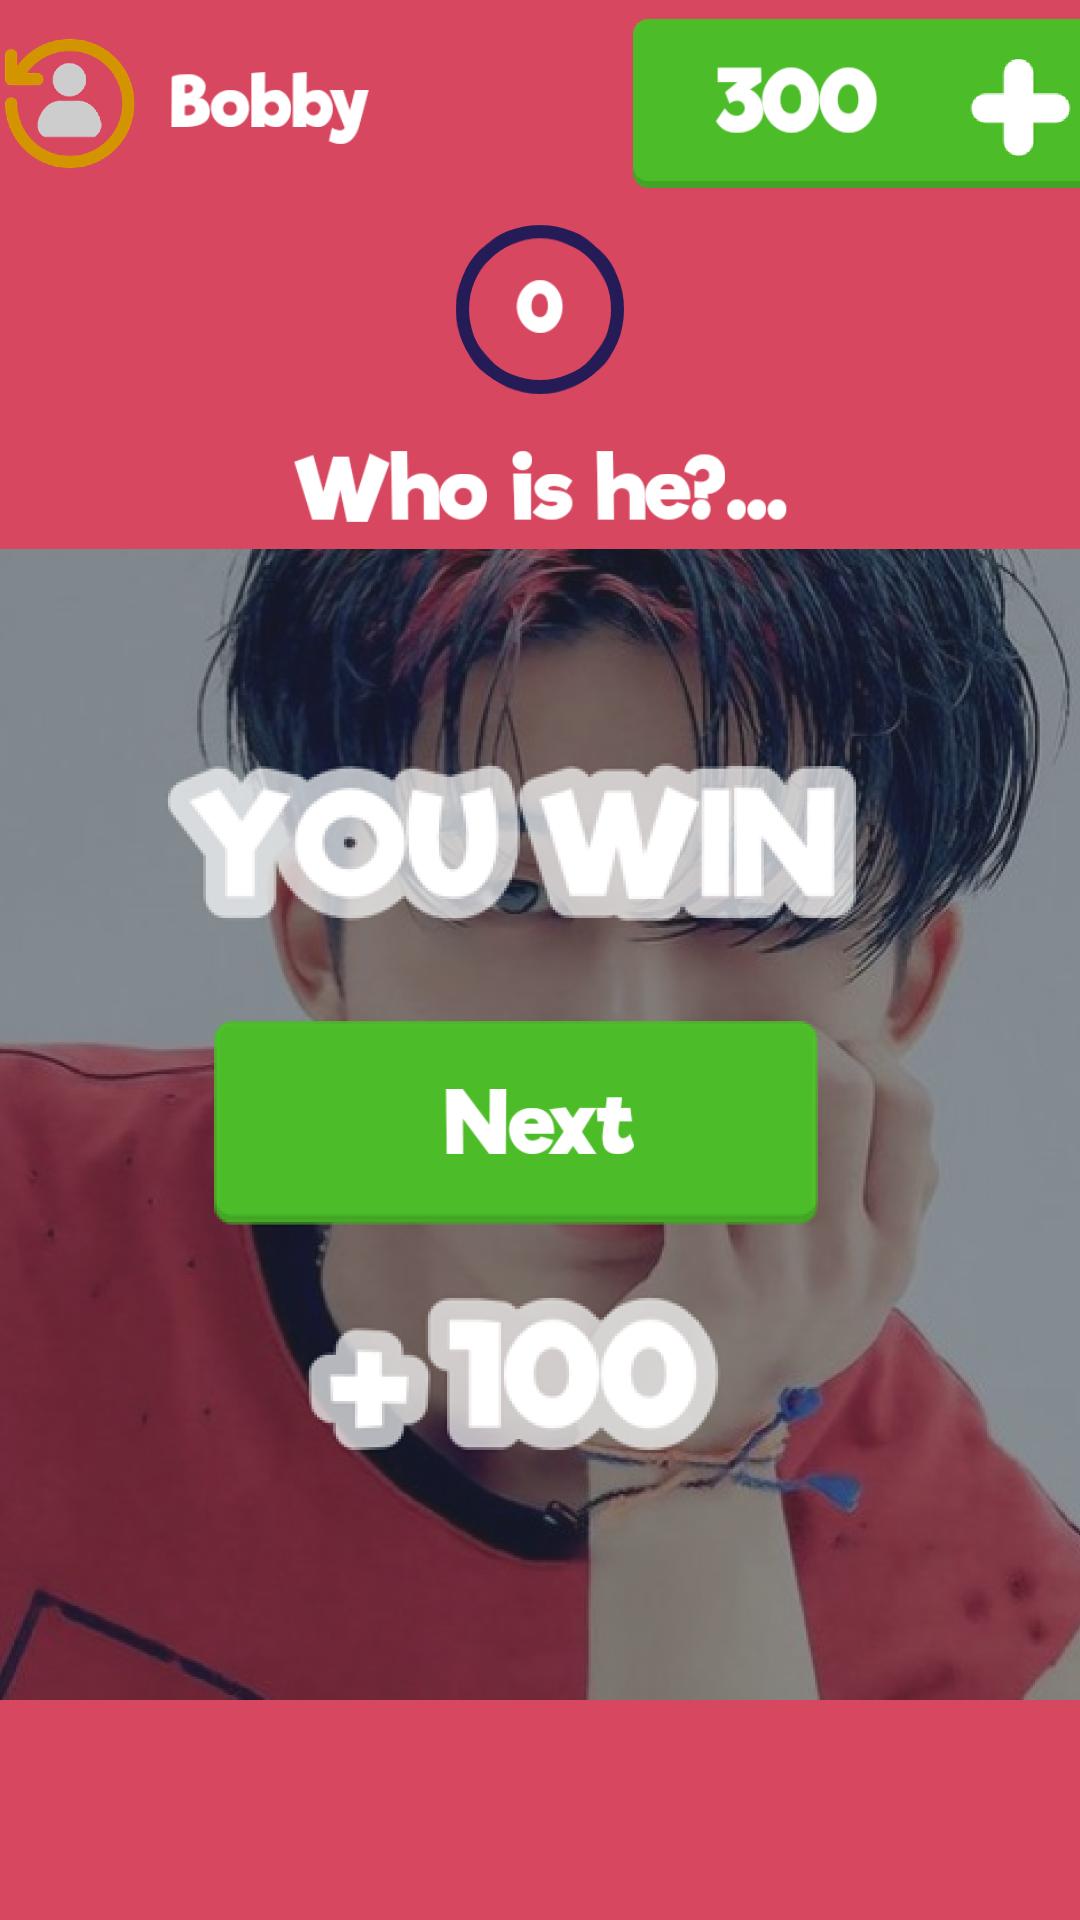 Guess IKON Member for Android - APK Download